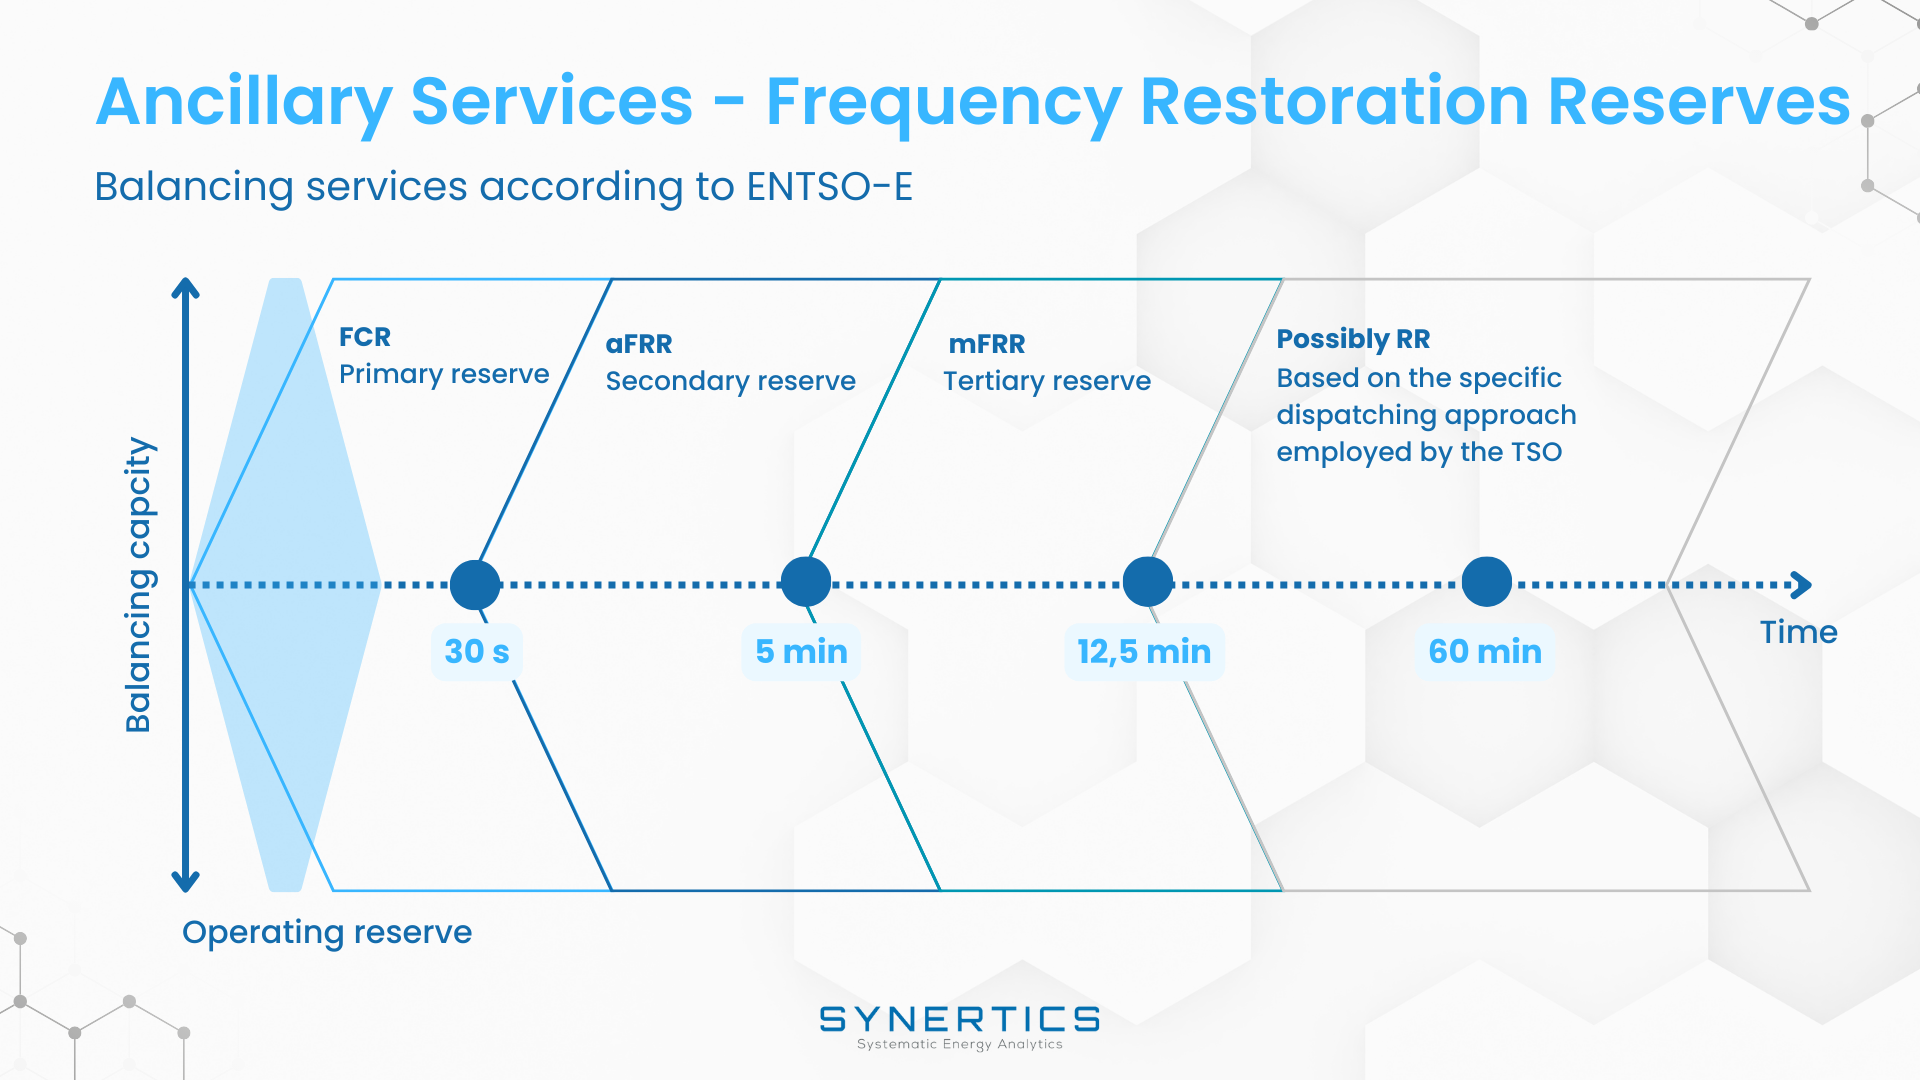 synertics post ancillary services - frequency restoration reserves